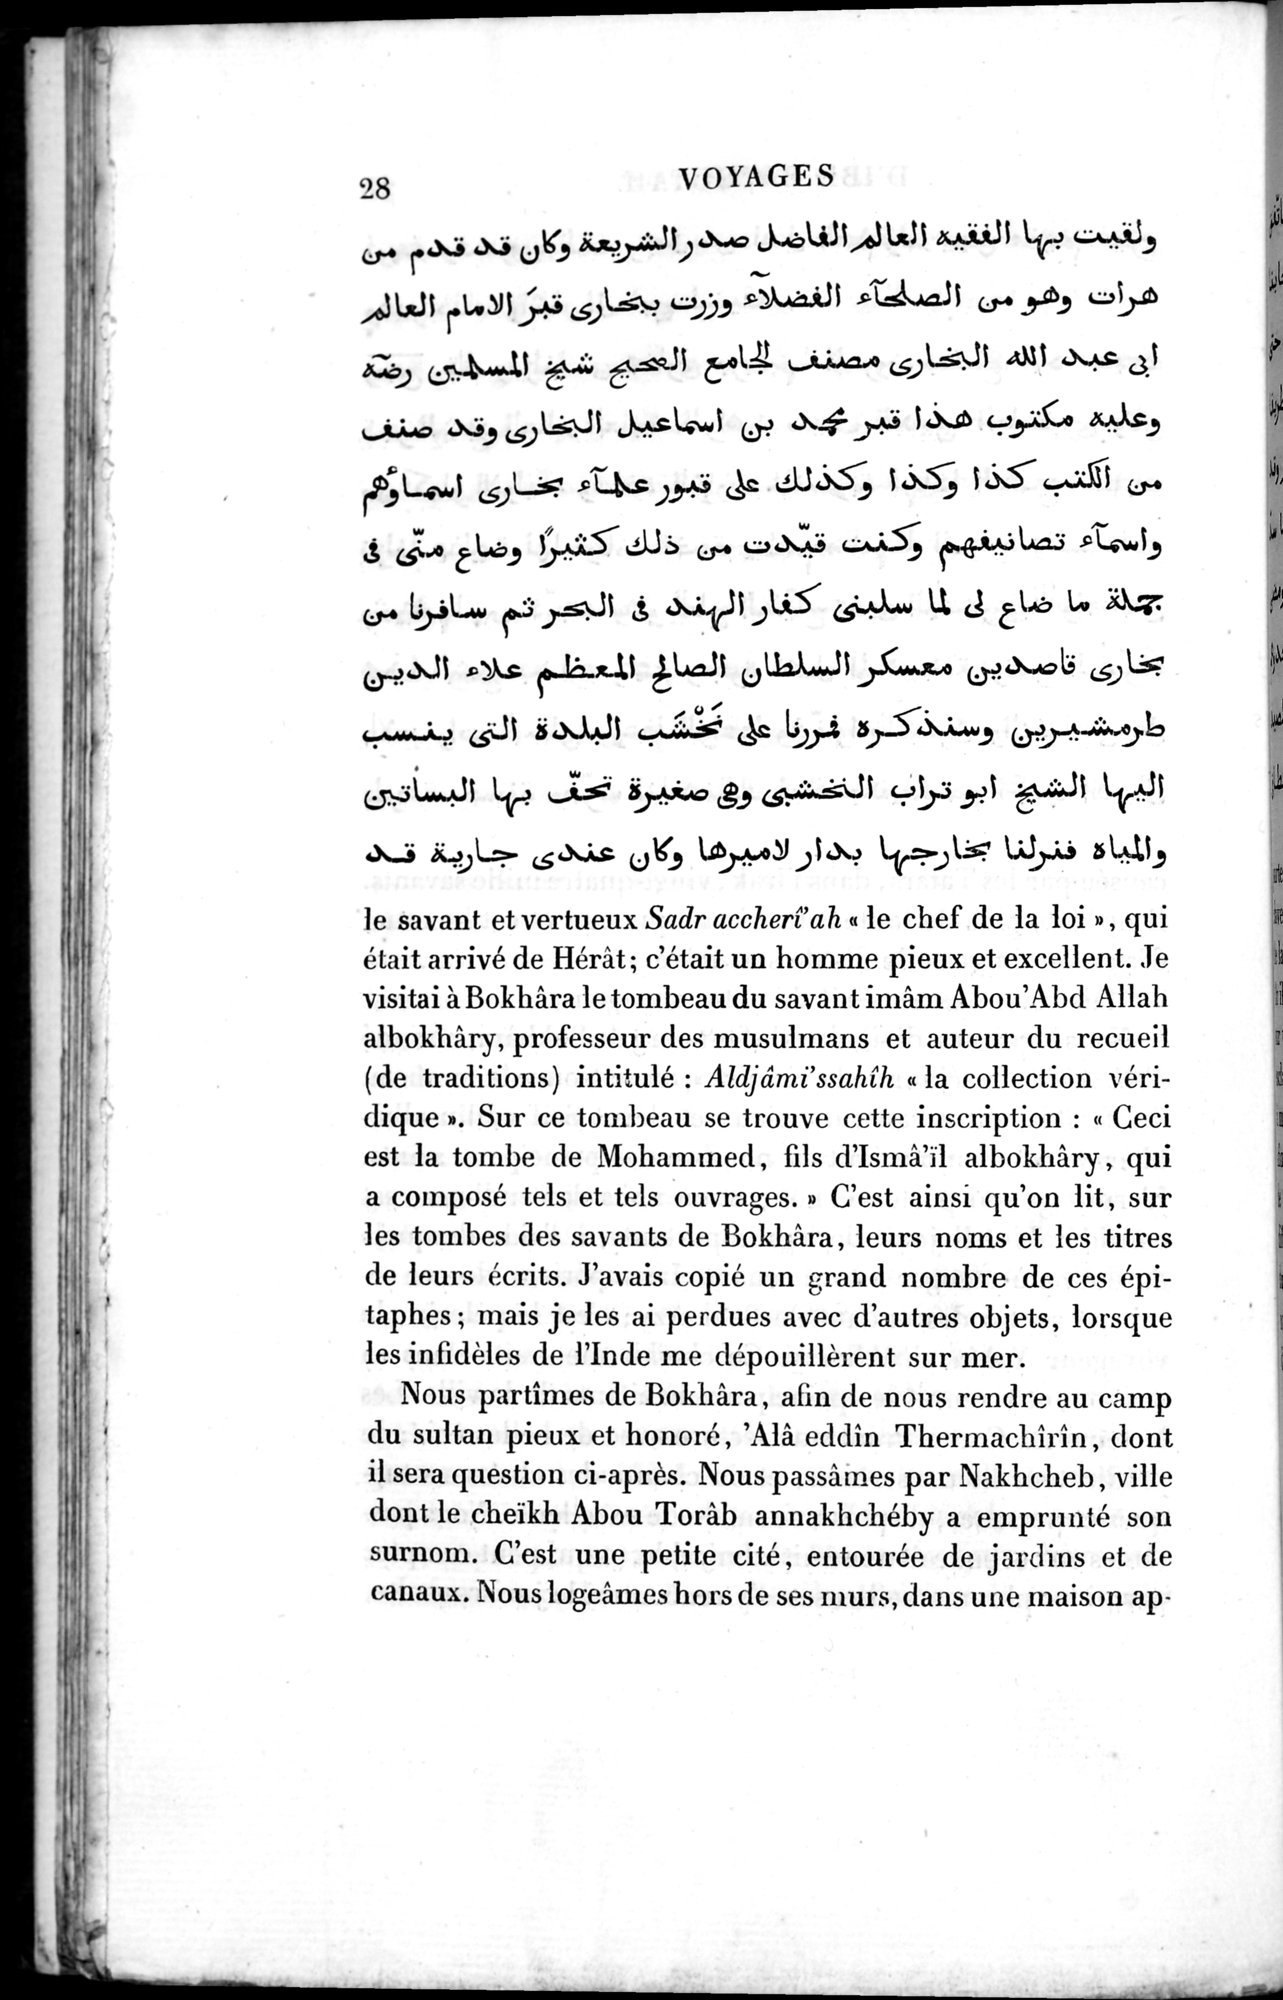 Voyages d'Ibn Batoutah : vol.3 / Page 68 (Grayscale High Resolution Image)